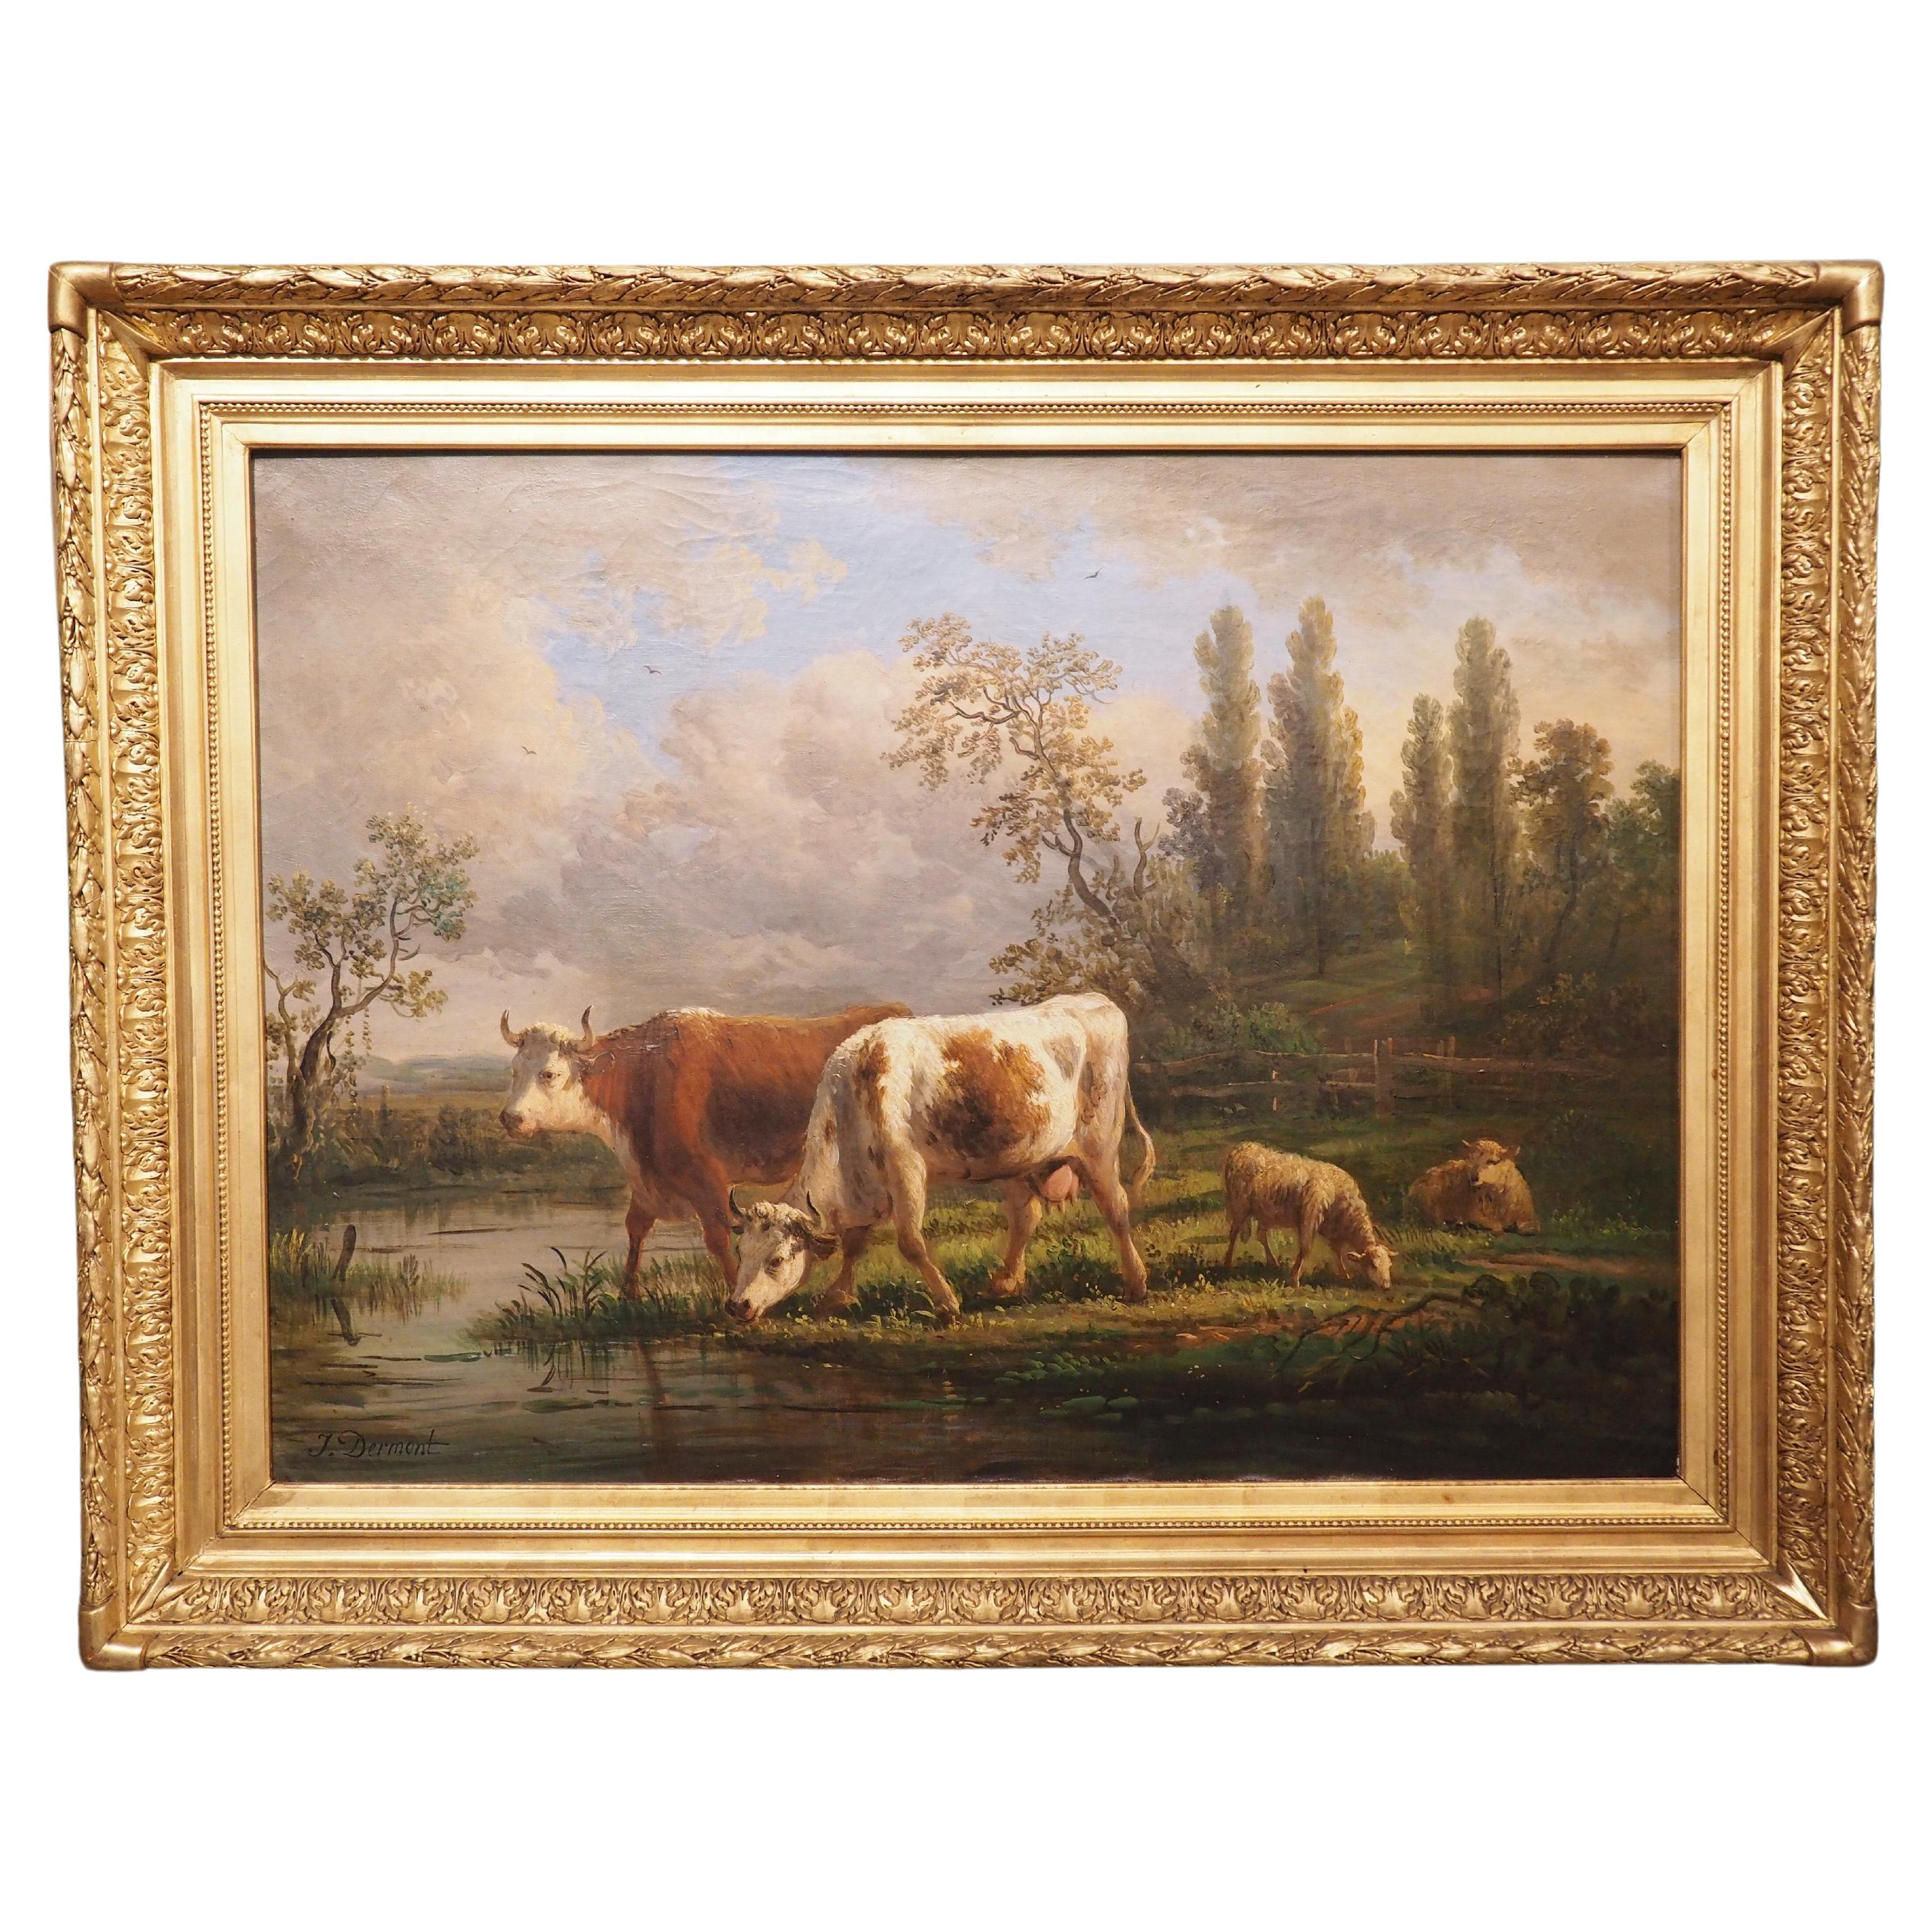 19th Century French Landscape with Cows Painting in Giltwood Frame, J. Dermont